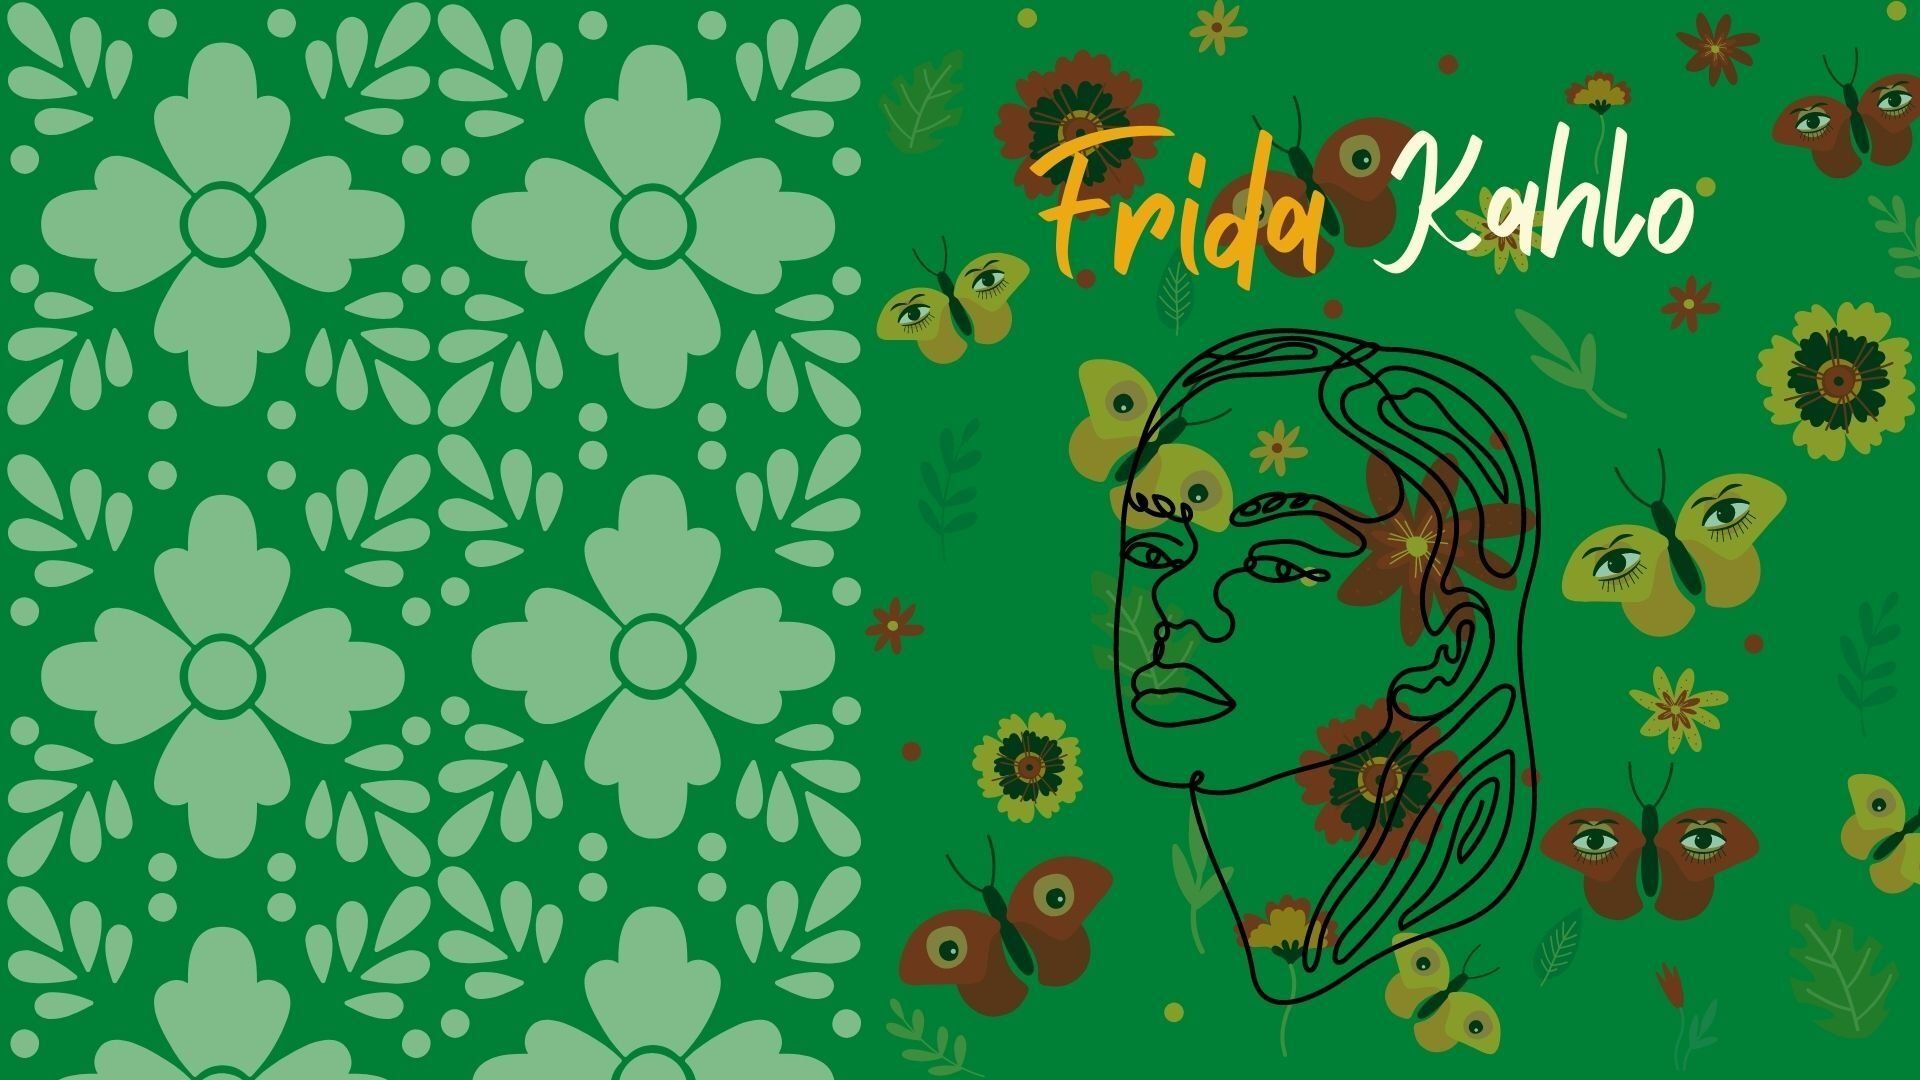 A green background with a floral pattern and a portrait of Frida Kahlo. - Frida Kahlo